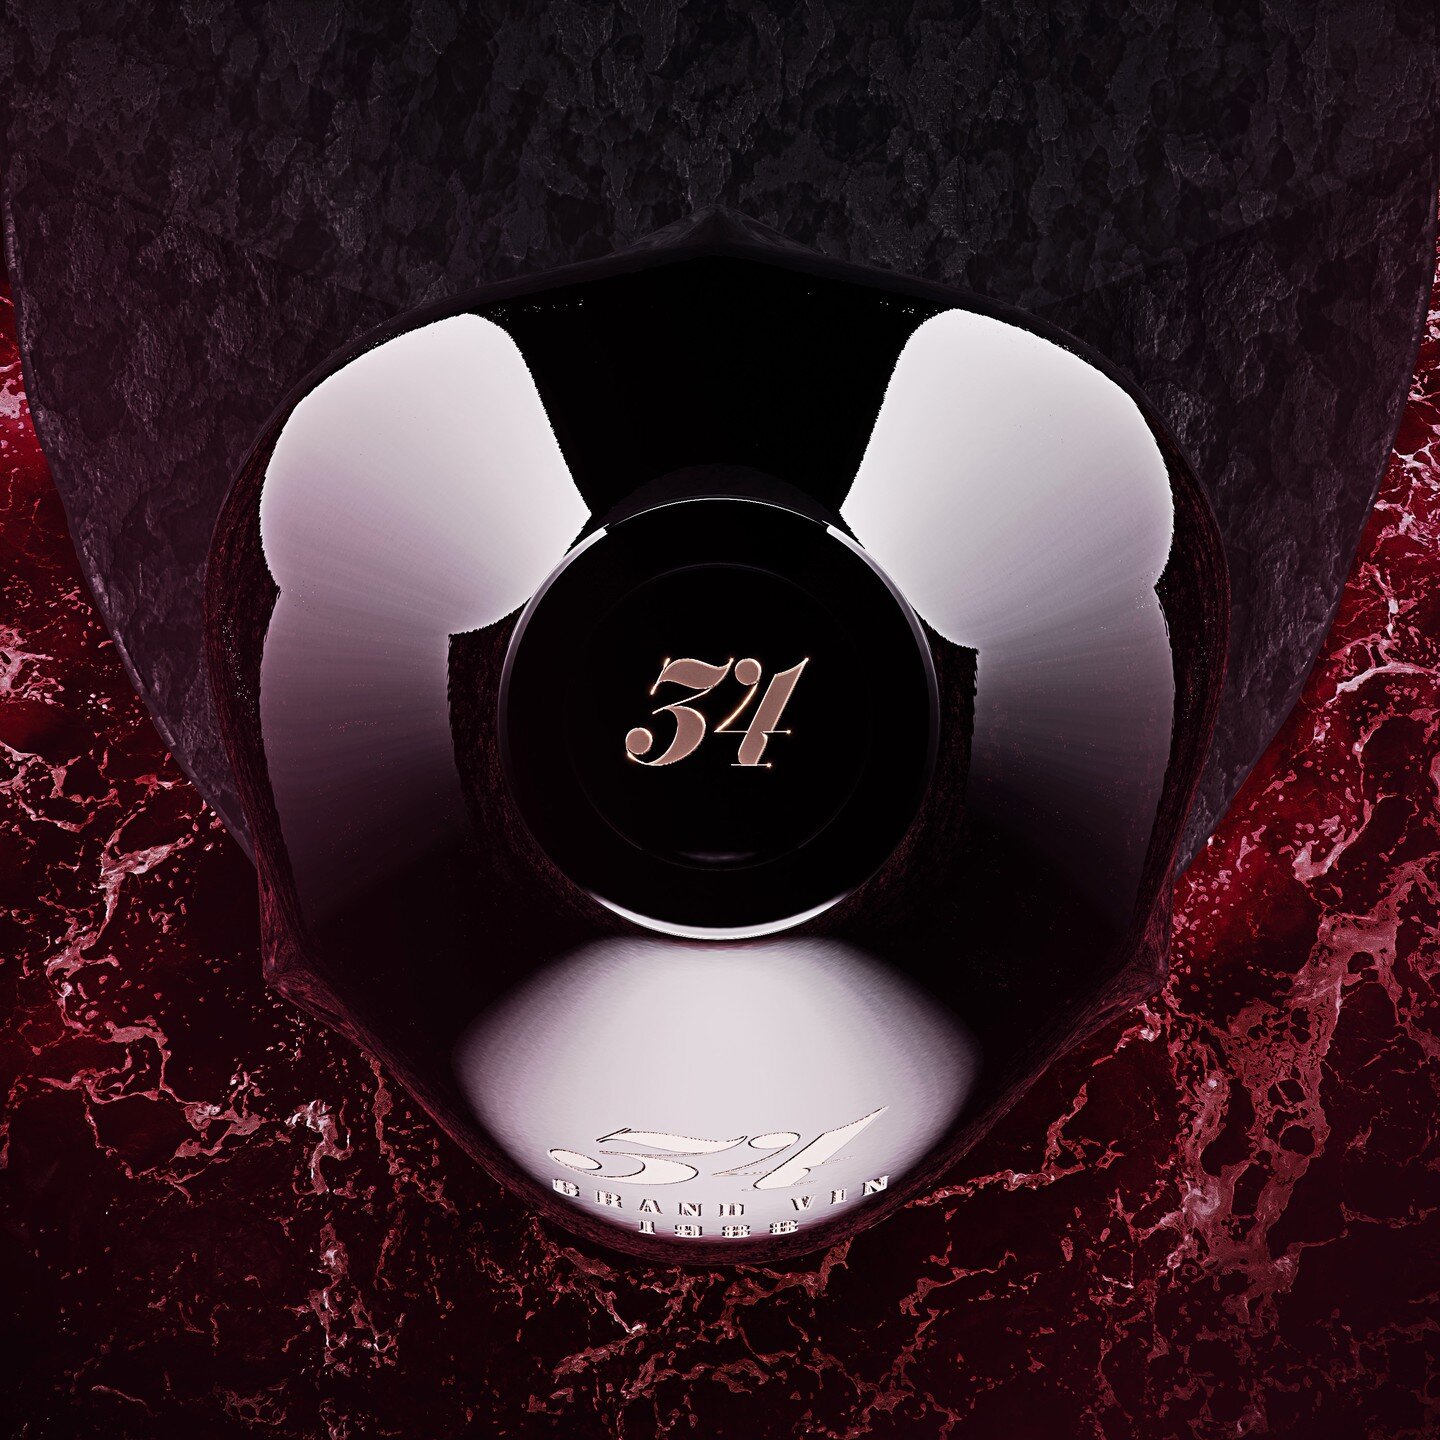 34 is suitable for premium red wines. The bottle can be black, white or covered with a gradient. The only recommended closure is @vinolok_global